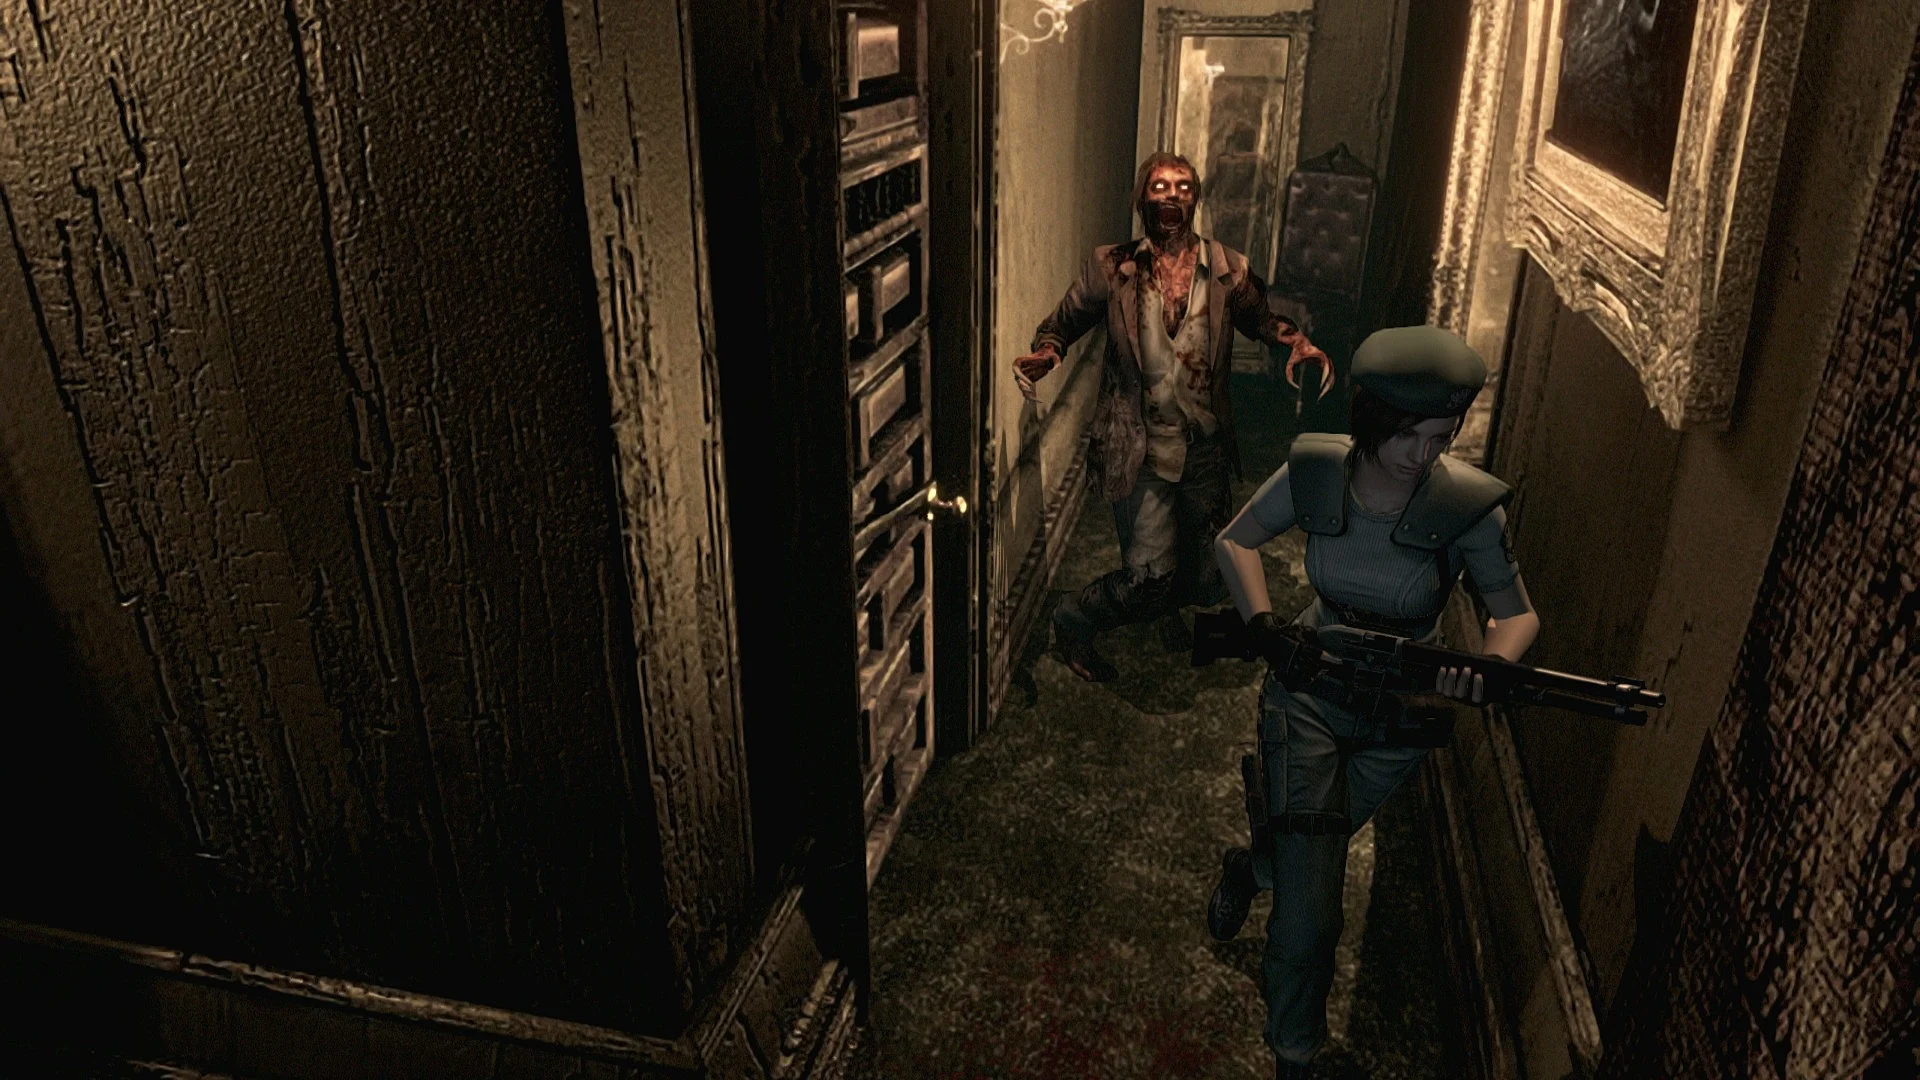 Rumors: Capcom is working on a remake of the first Resident Evil game